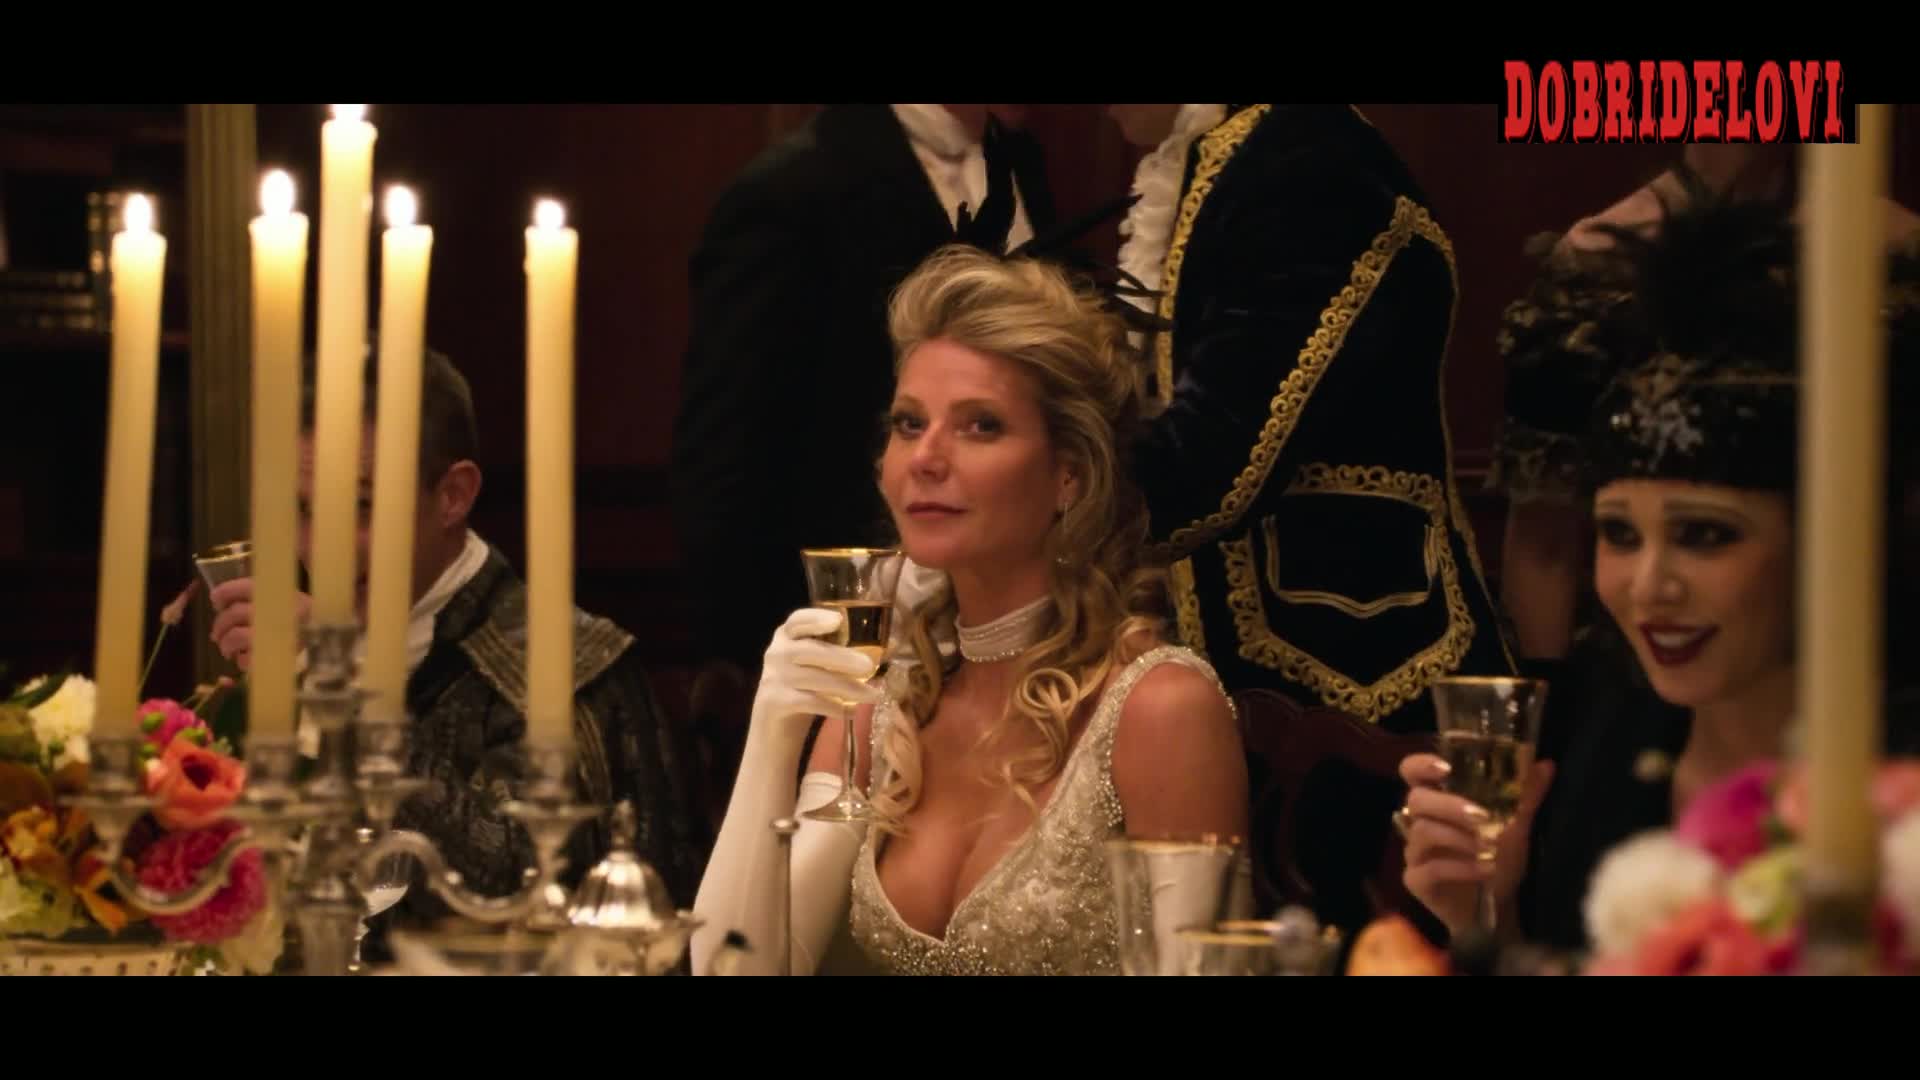 Gwyneth Paltrow sexy cleavage at dinner party scene from The Politician